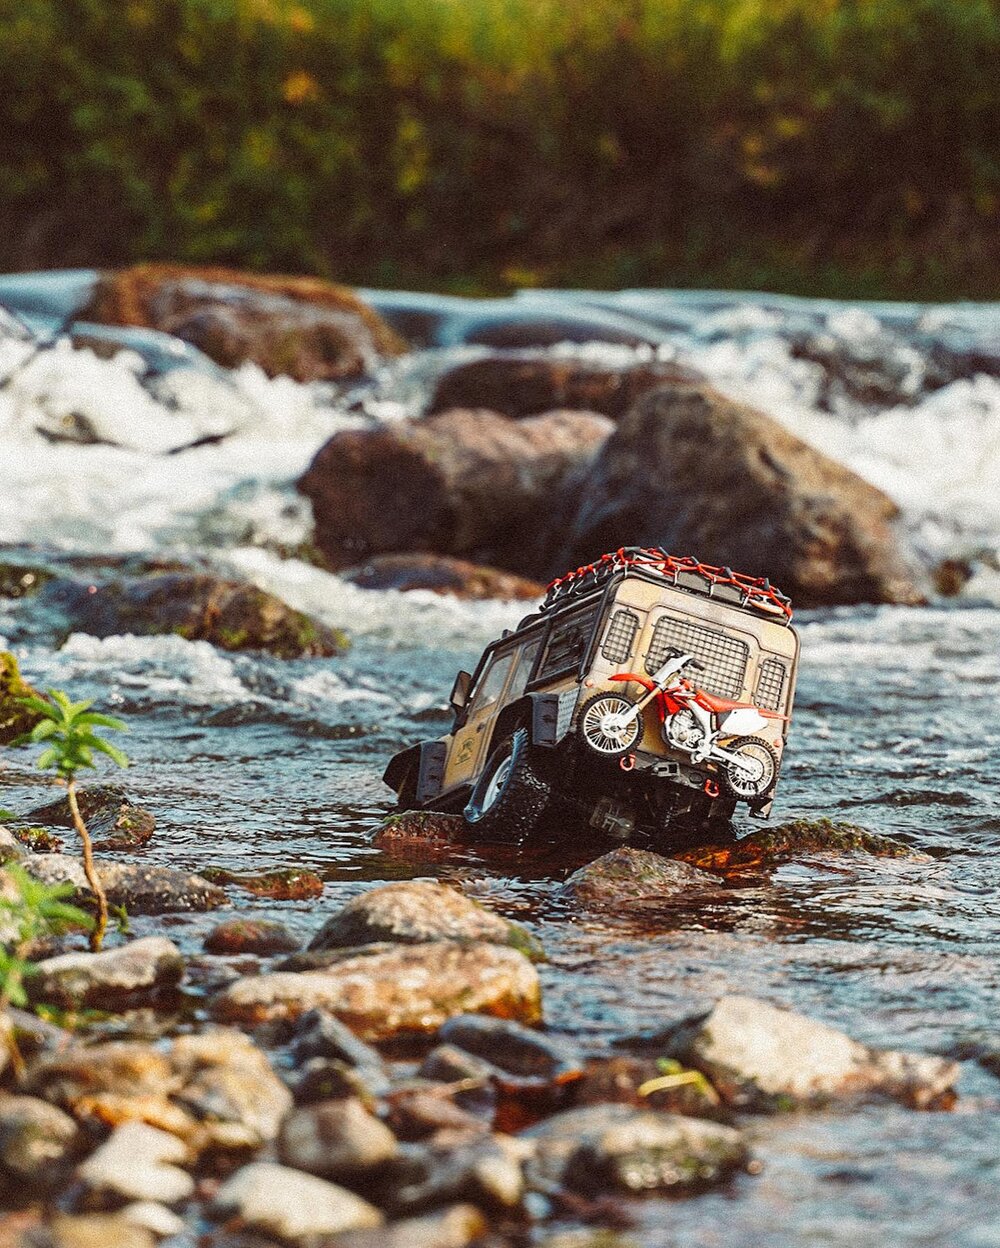 Prepping myself to dive head first into the week.
&mdash;&mdash;&mdash;&mdash;&mdash;&mdash;&mdash;&mdash;&mdash;&mdash;&mdash;&mdash;
#wanderremote #wanderlustnotless
@traxxas 
&mdash;&mdash;&mdash;&mdash;&mdash;&mdash;&mdash;&mdash;&mdash;&mdash;&m